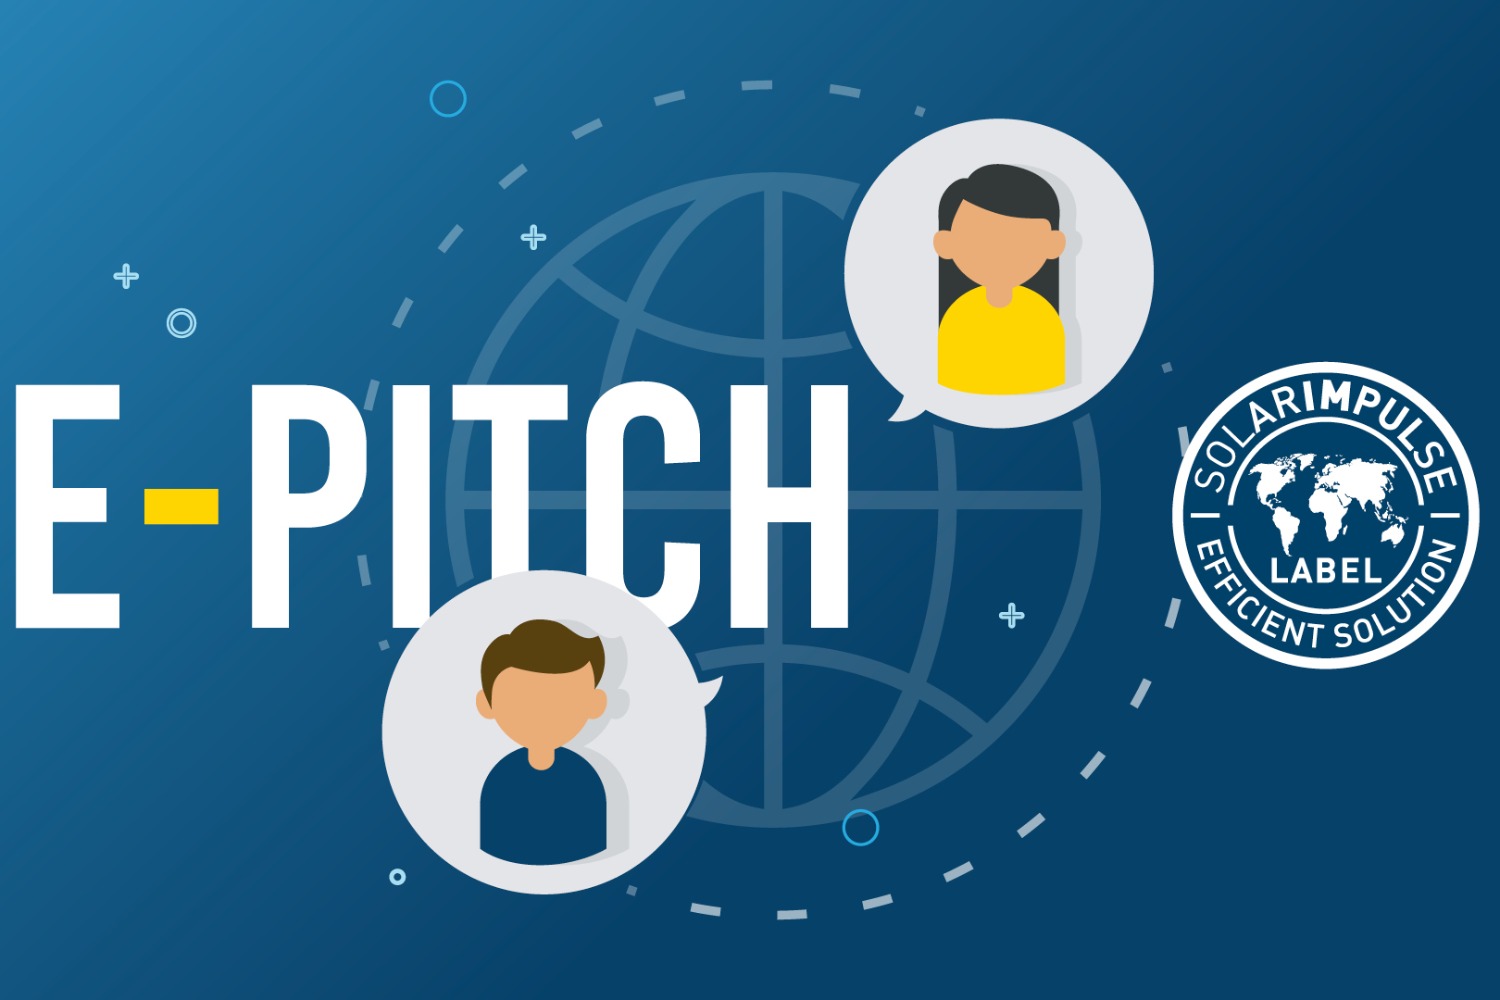 E-Pitch Solar Impulse Investment - "Sustainable Fashion & Luxury Goods" E-Pitch - SIF x LVMH